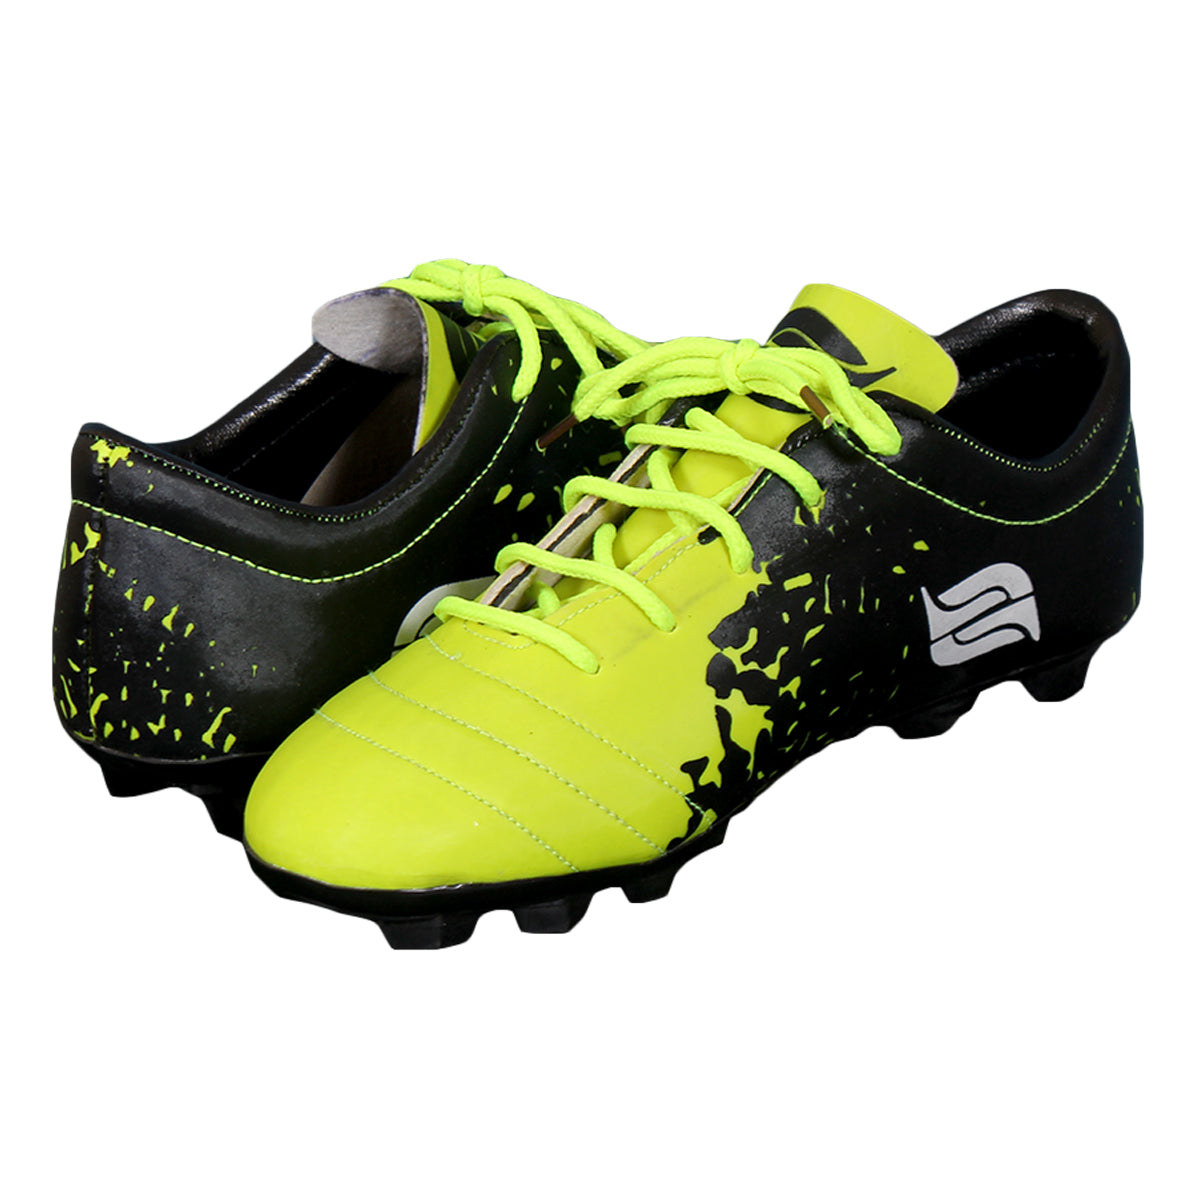 The ADI Lace Up Football Shoes For Synthetic Turf & Hard Ground | Football Studs Available in Multiple Sizes & Colours, Pair of 1